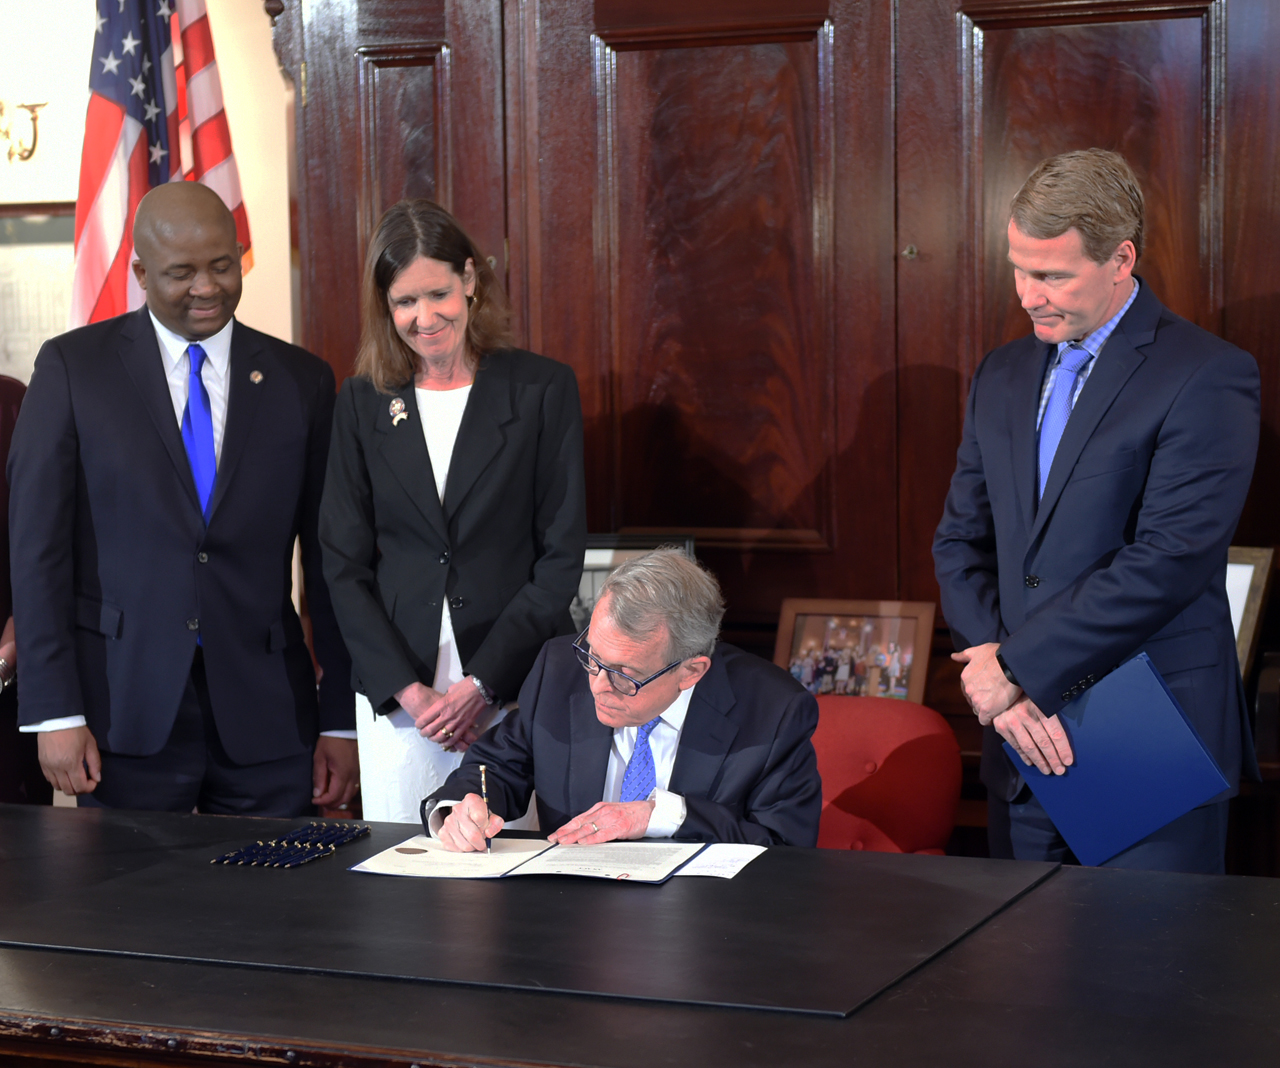 Rep. Richardson stands alongside Governor DeWine, Lt. Governor Husted and Rep. Robinson as House Bill 4 is signed into law. The bill, sponsored by Rep. Richardson, develops industry-recognized credential and certificate programs in Ohio.